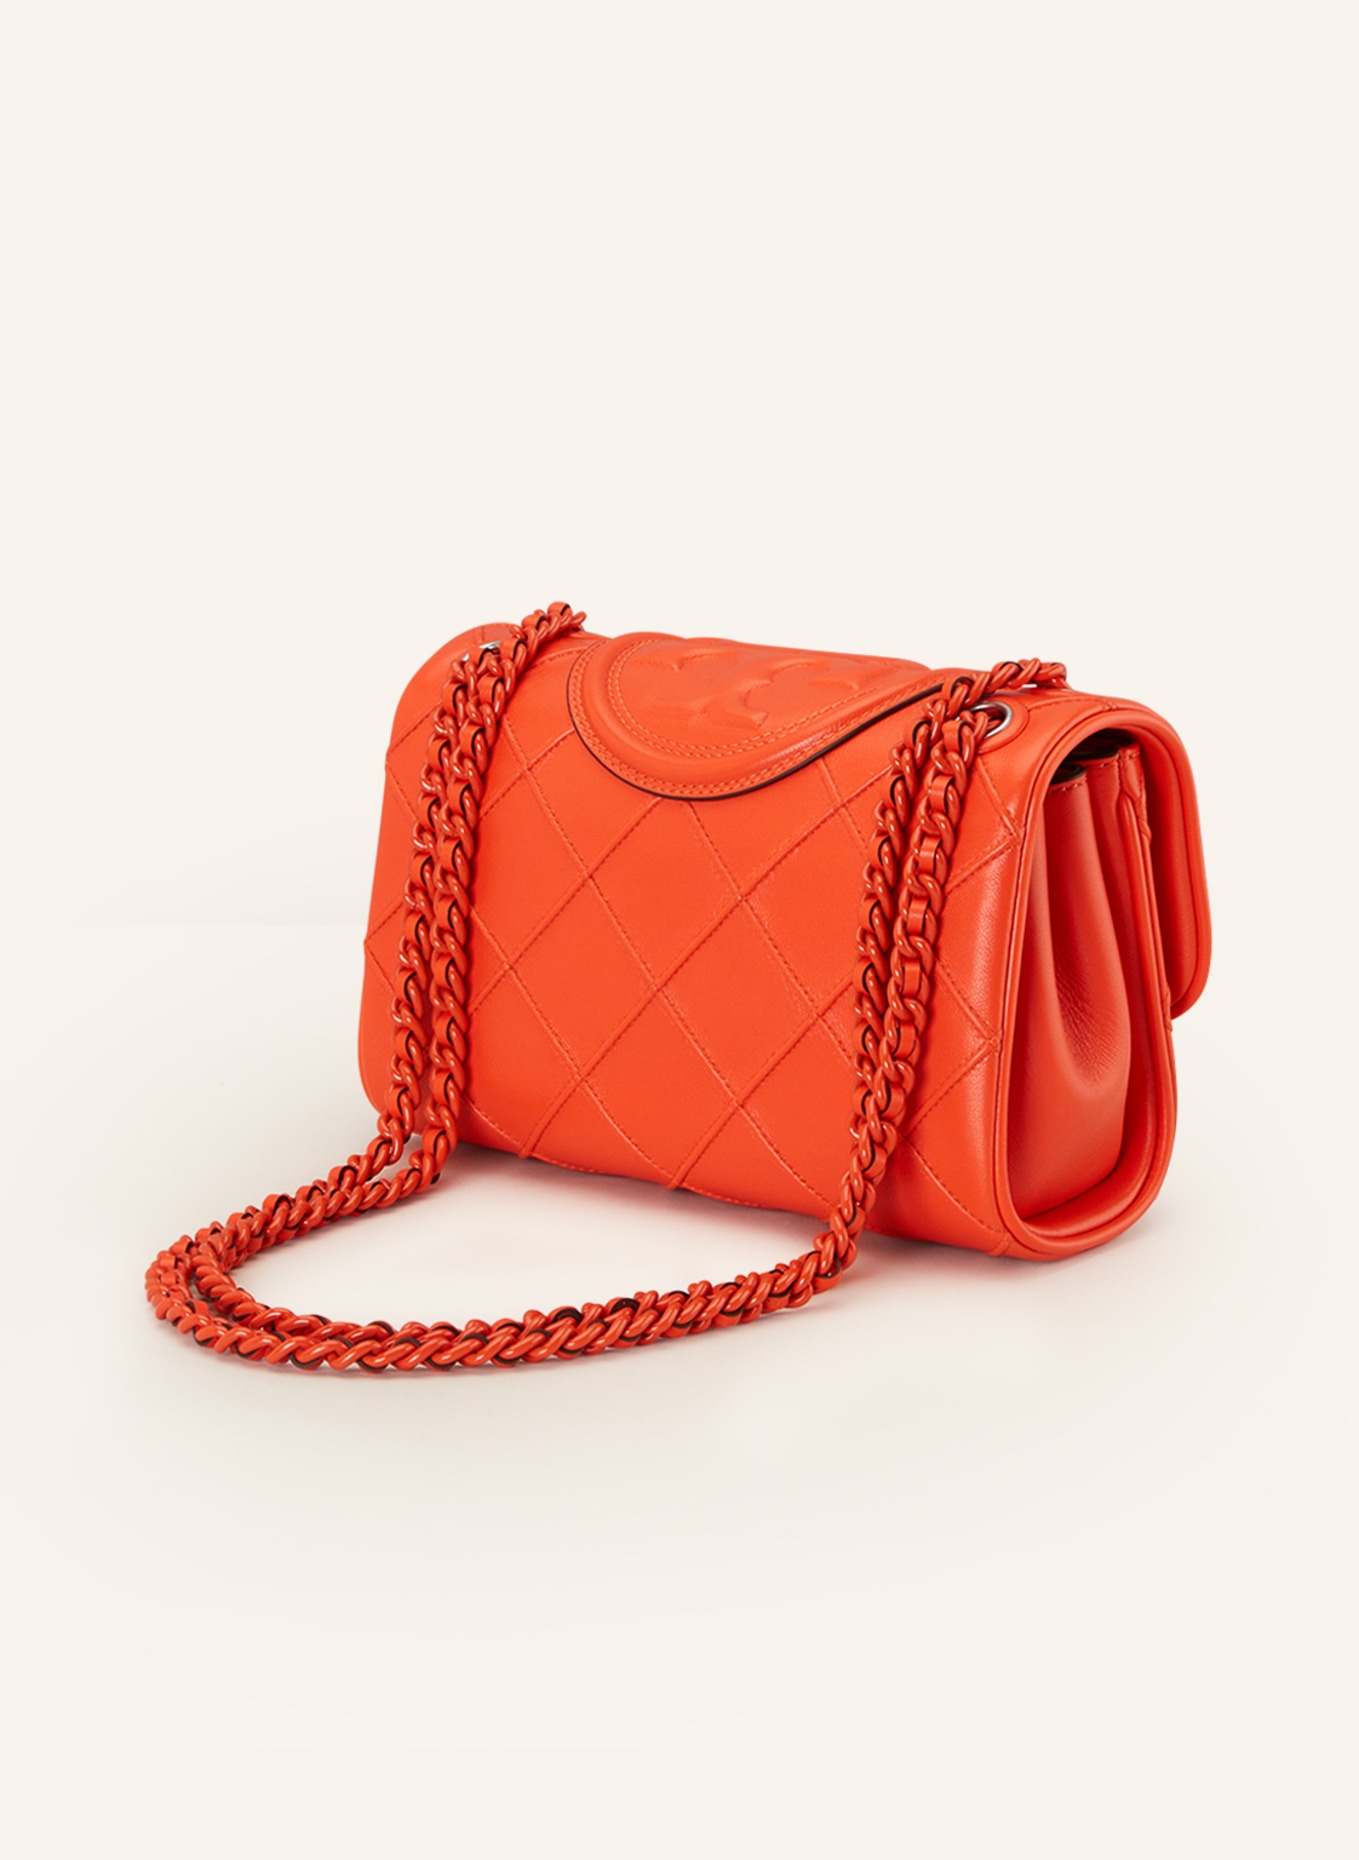 Fleming Soft of Tory Burch - Quilted leather bag orange colored